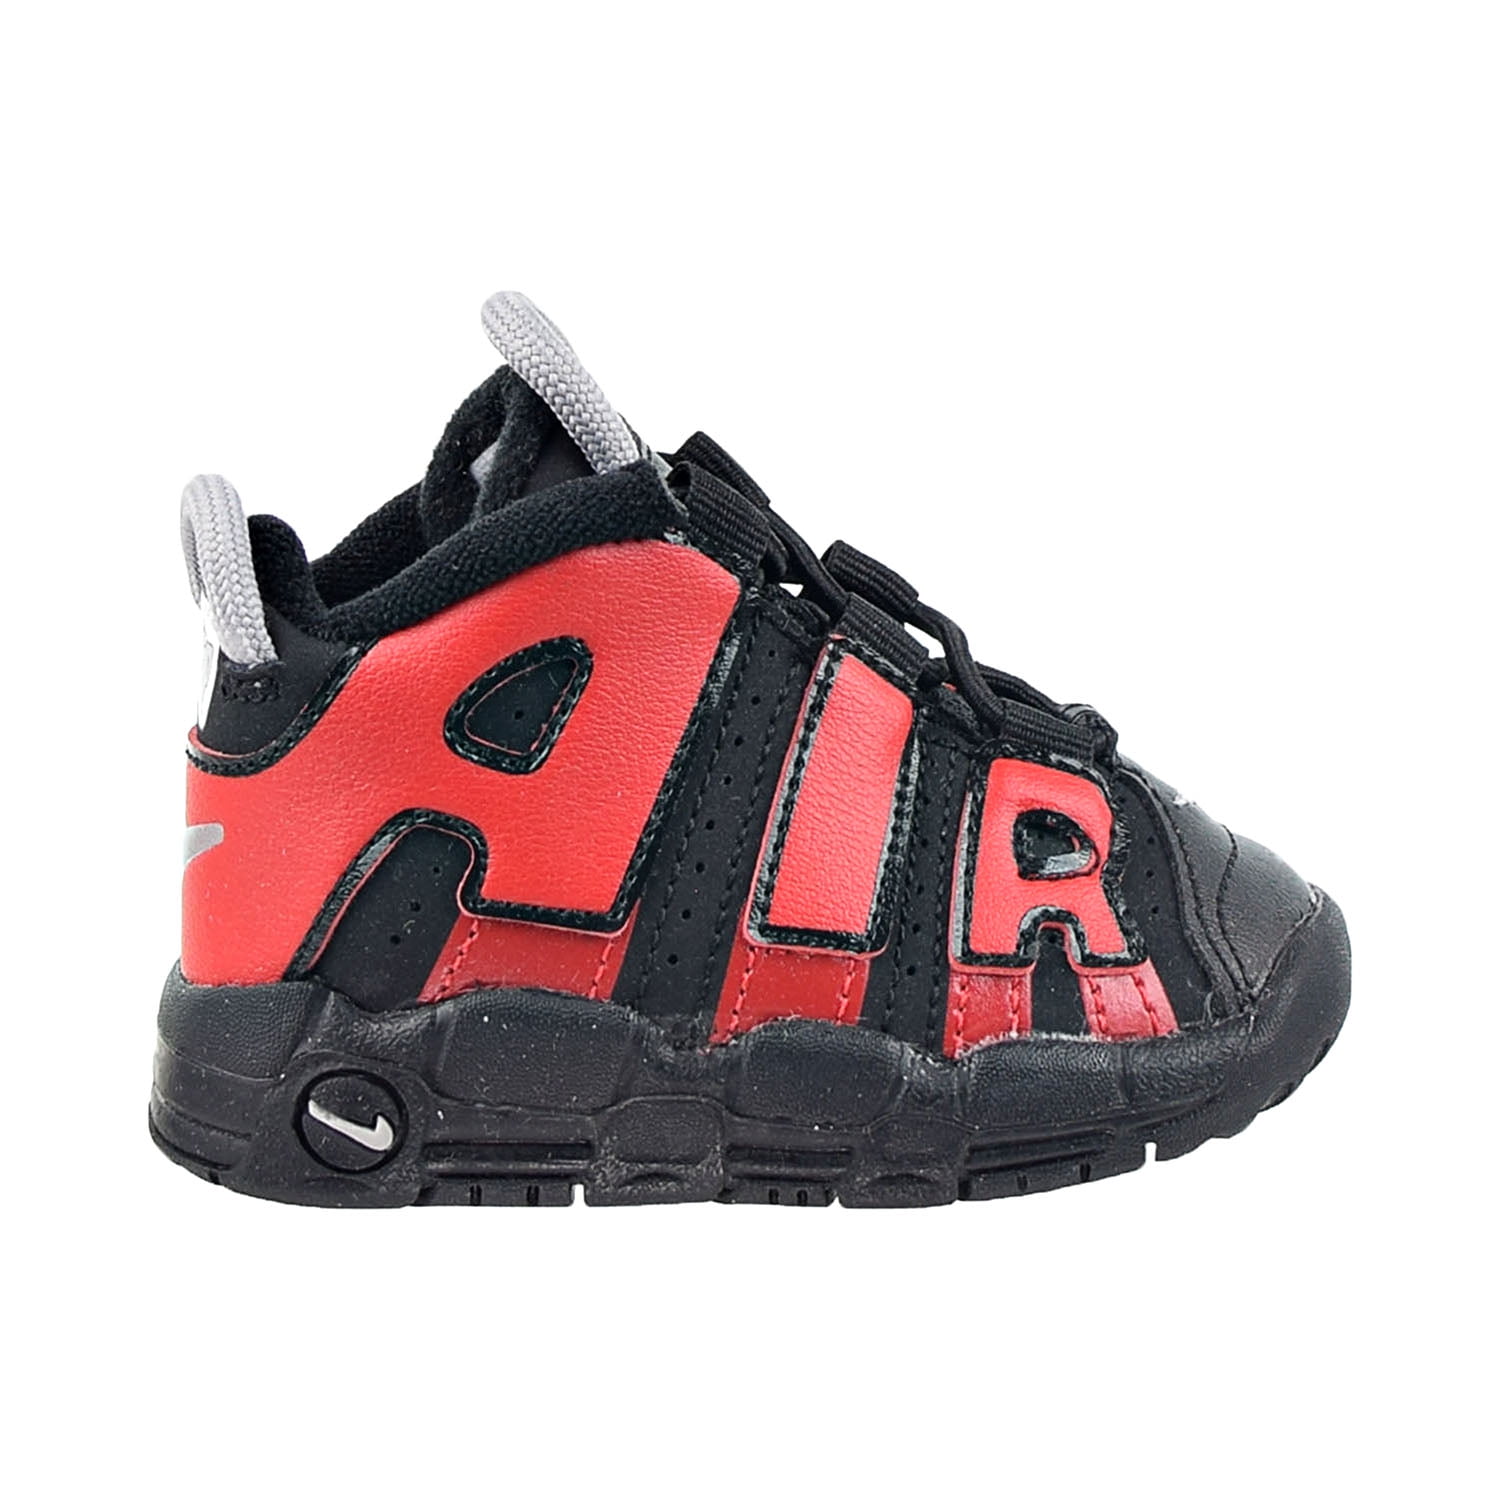 uptempo black and university red